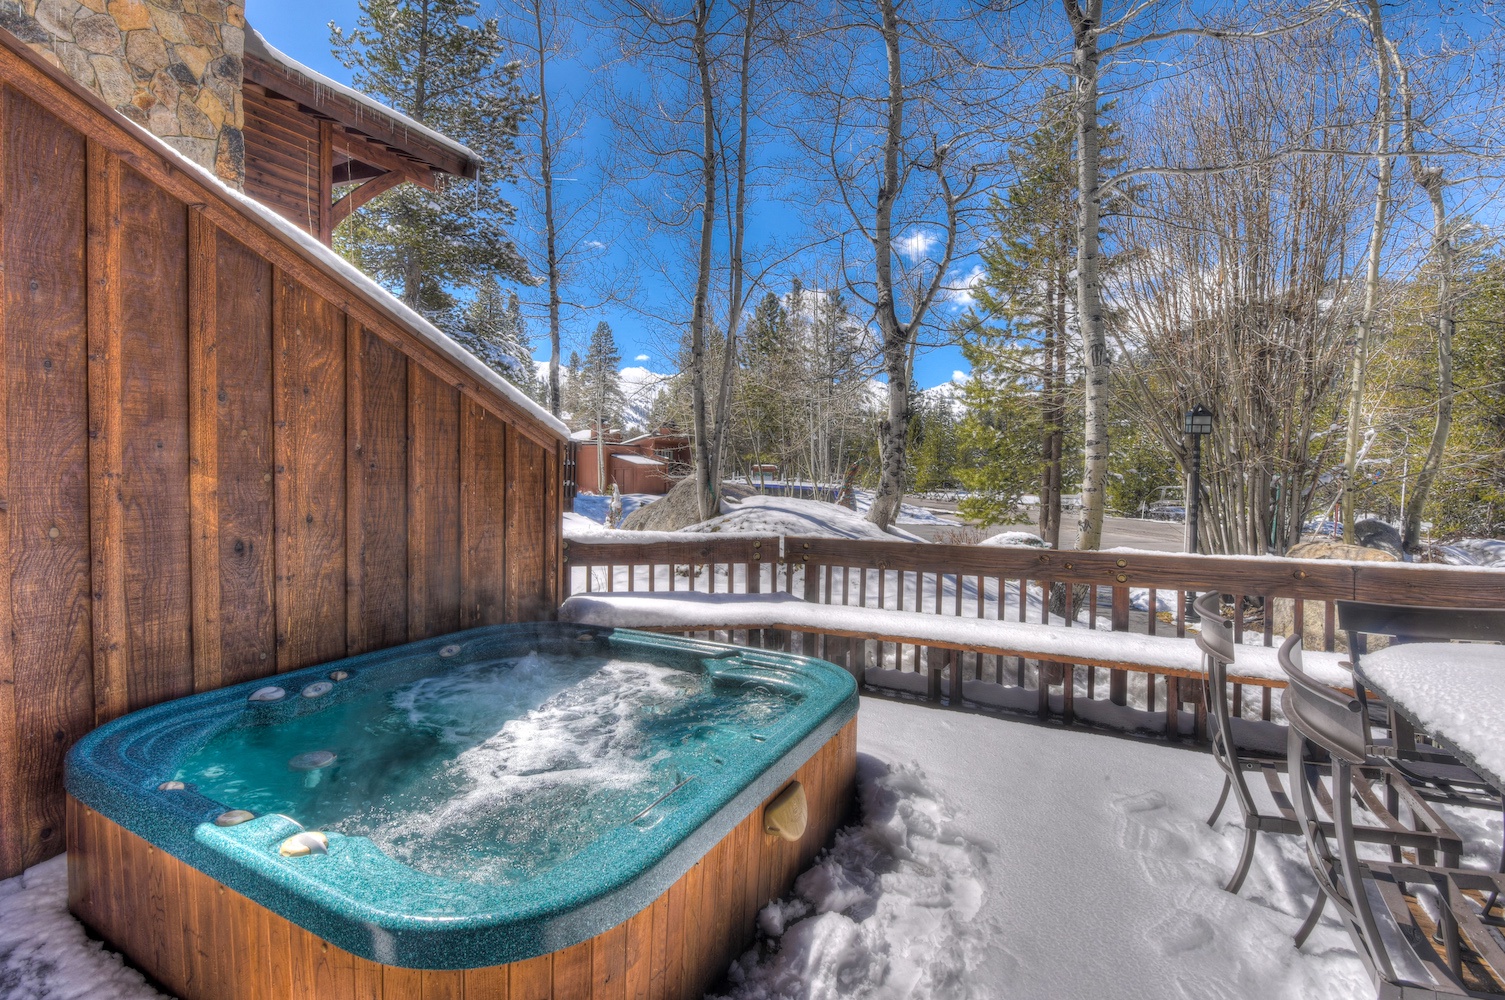 Hot tub outside the deck during winter